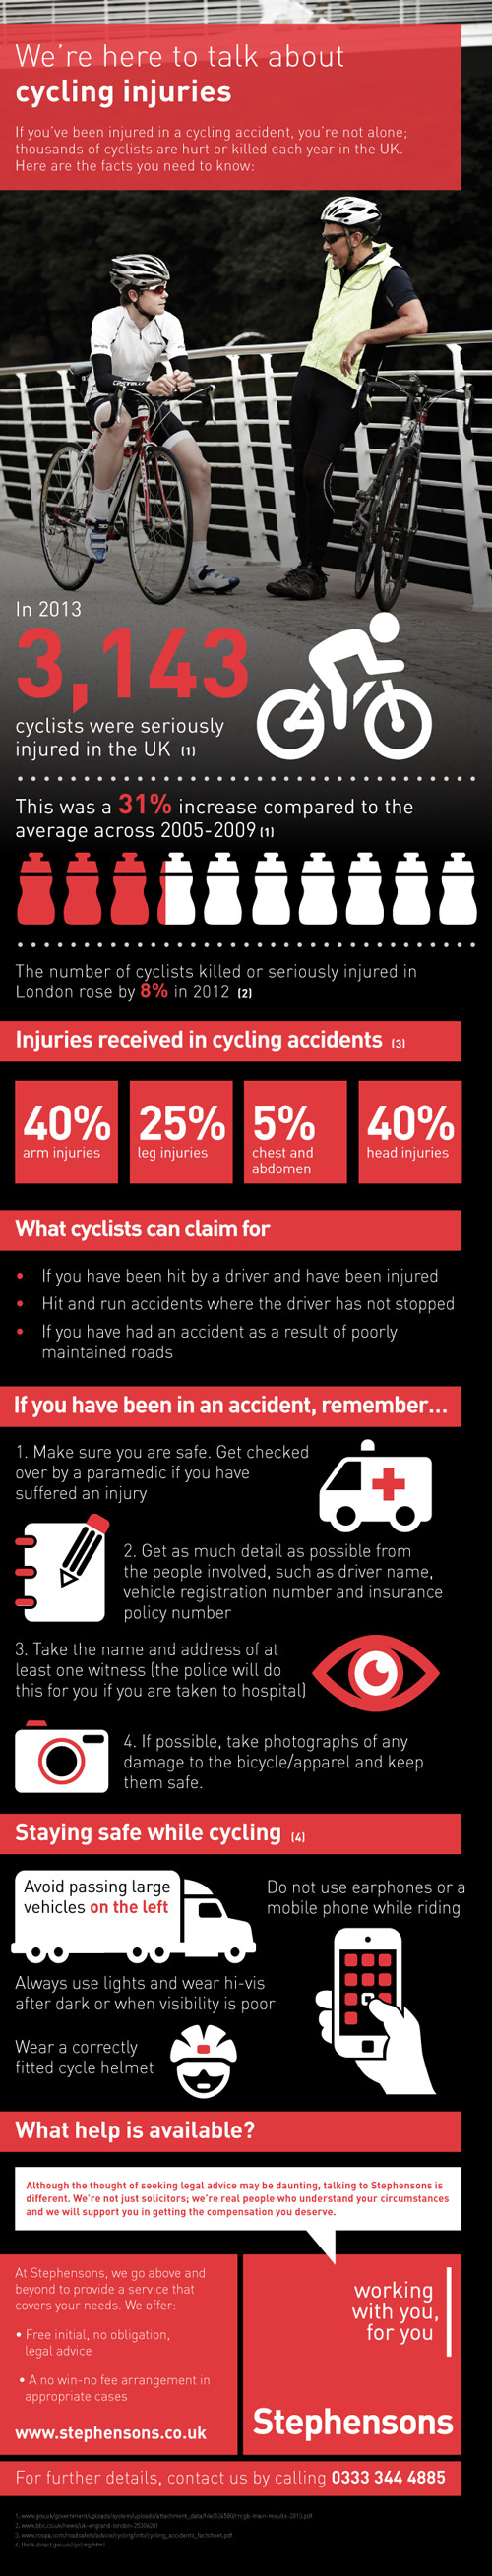 We're Here To Talk About Cycling Injuries